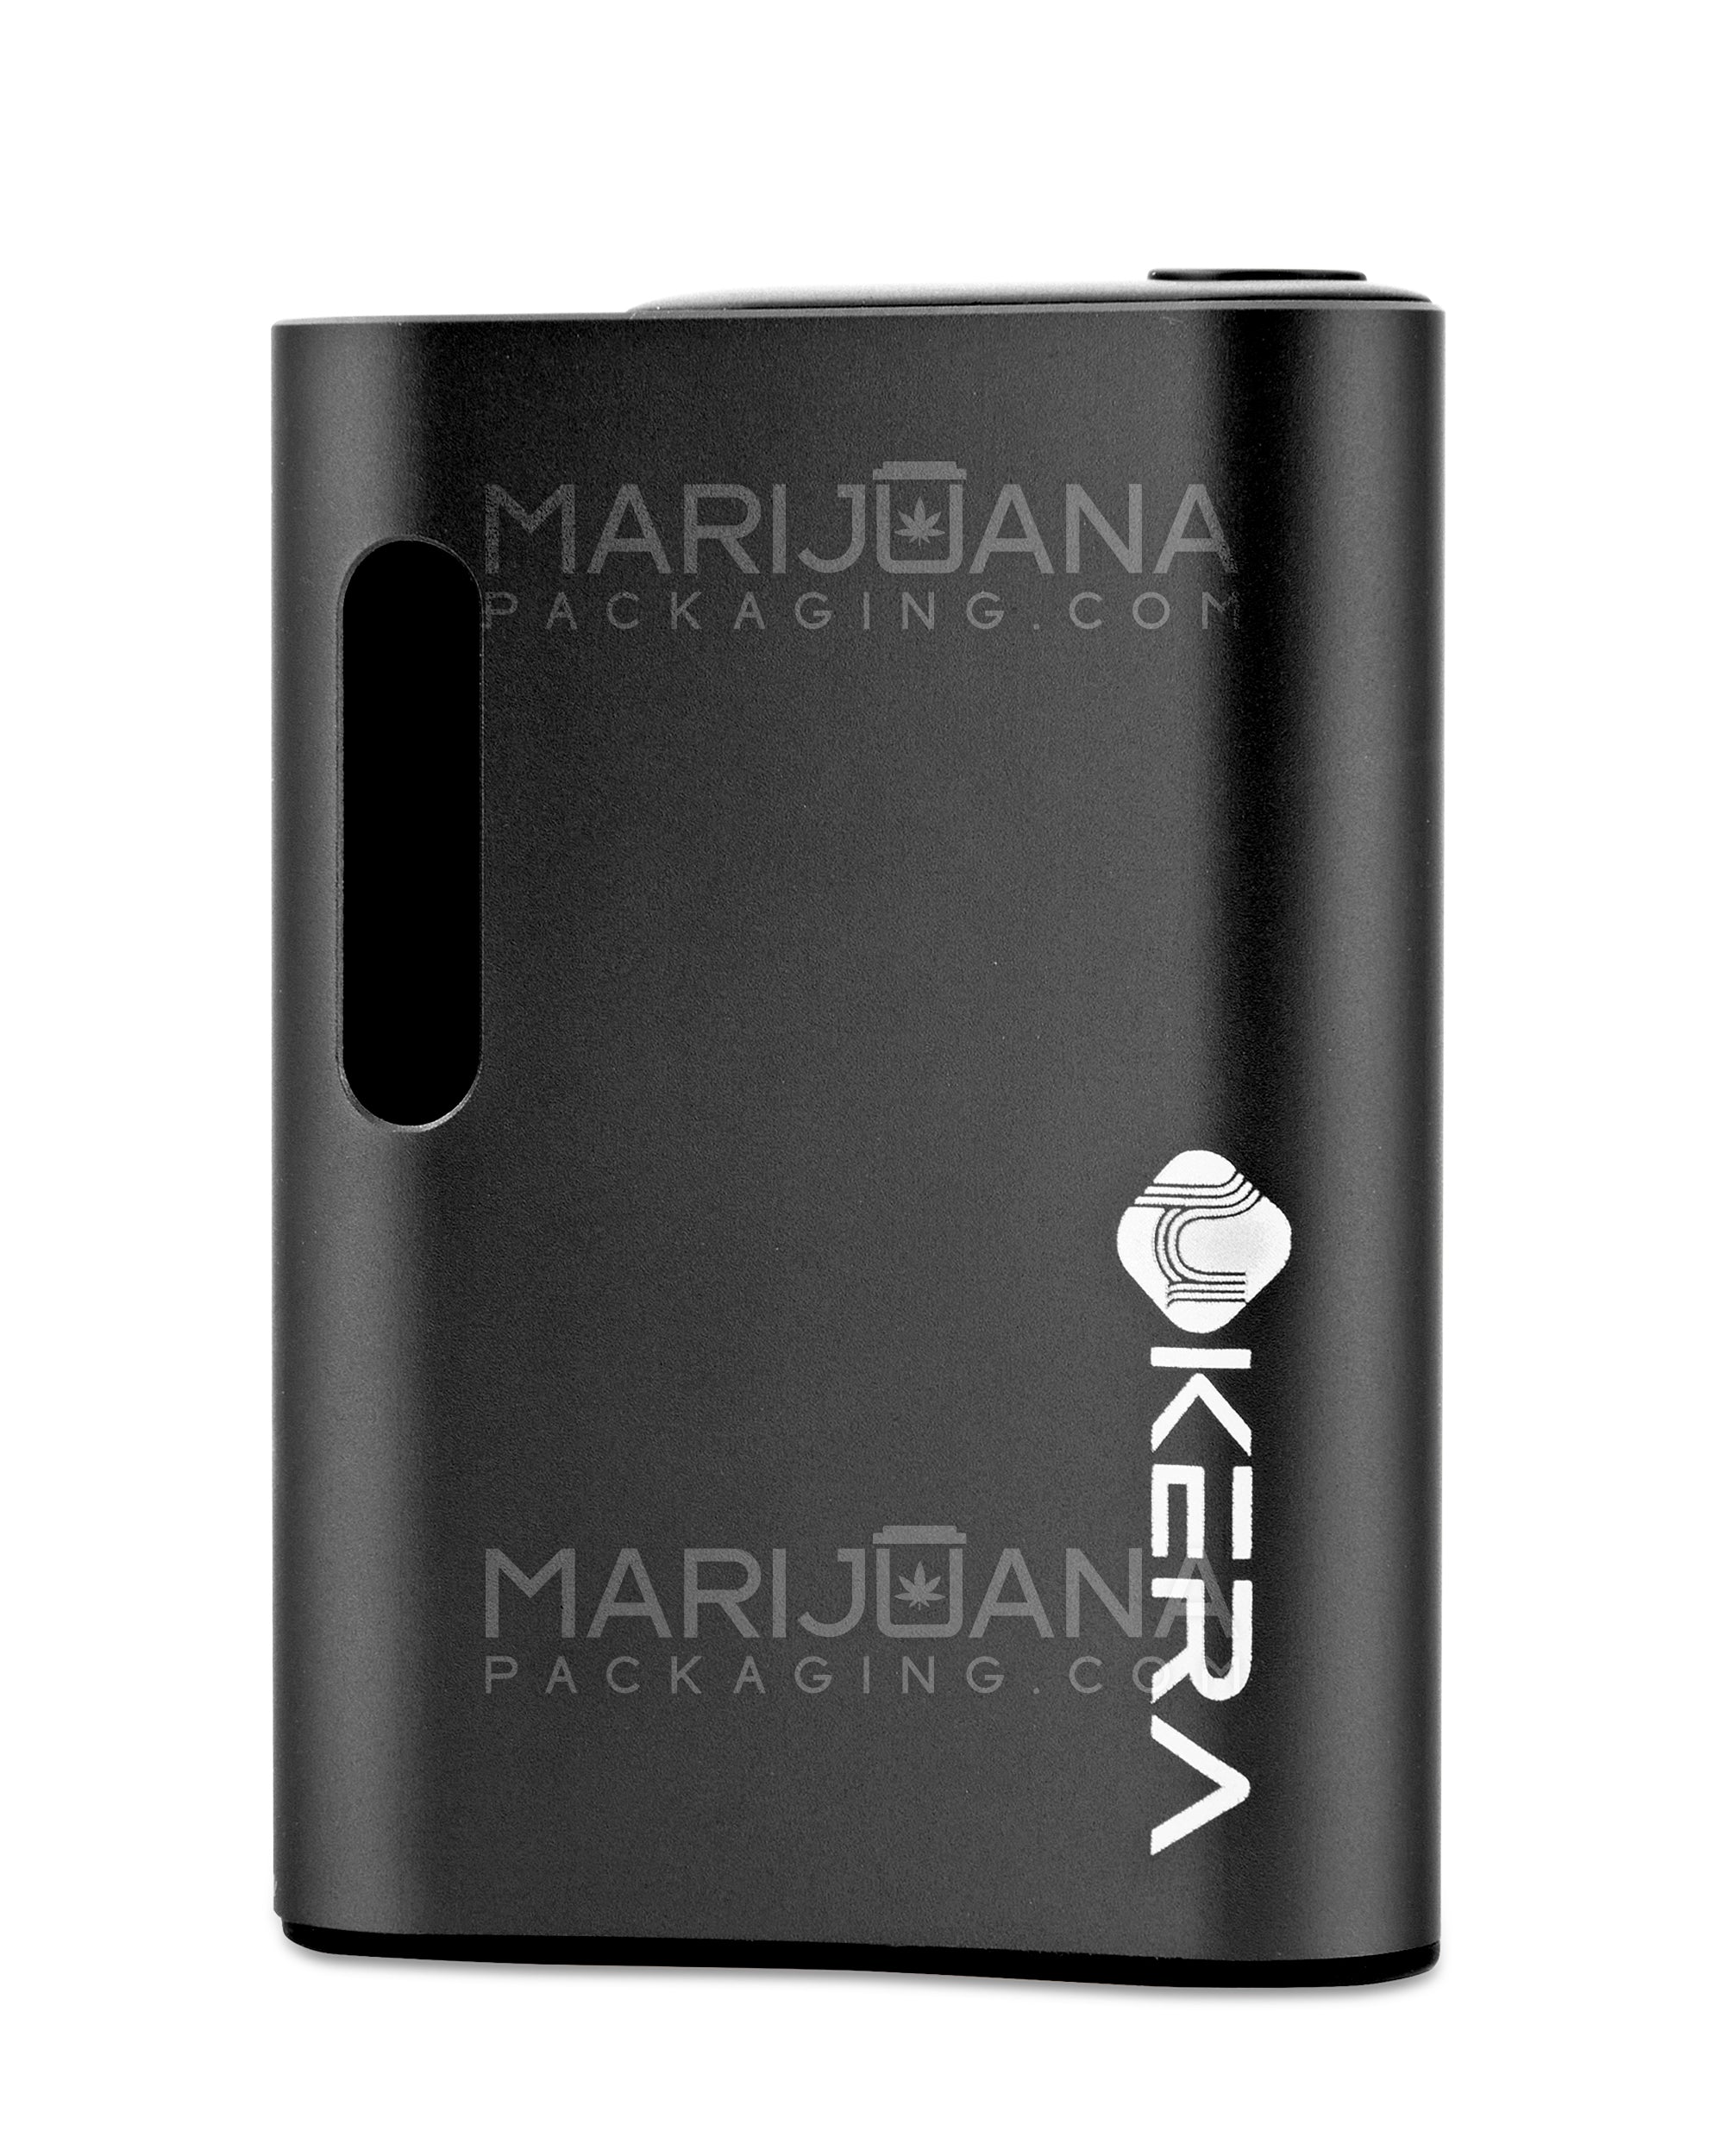 Vault SE 510 Thread Vape Battery with USB Charger | 500mAh - Black - 1 Count